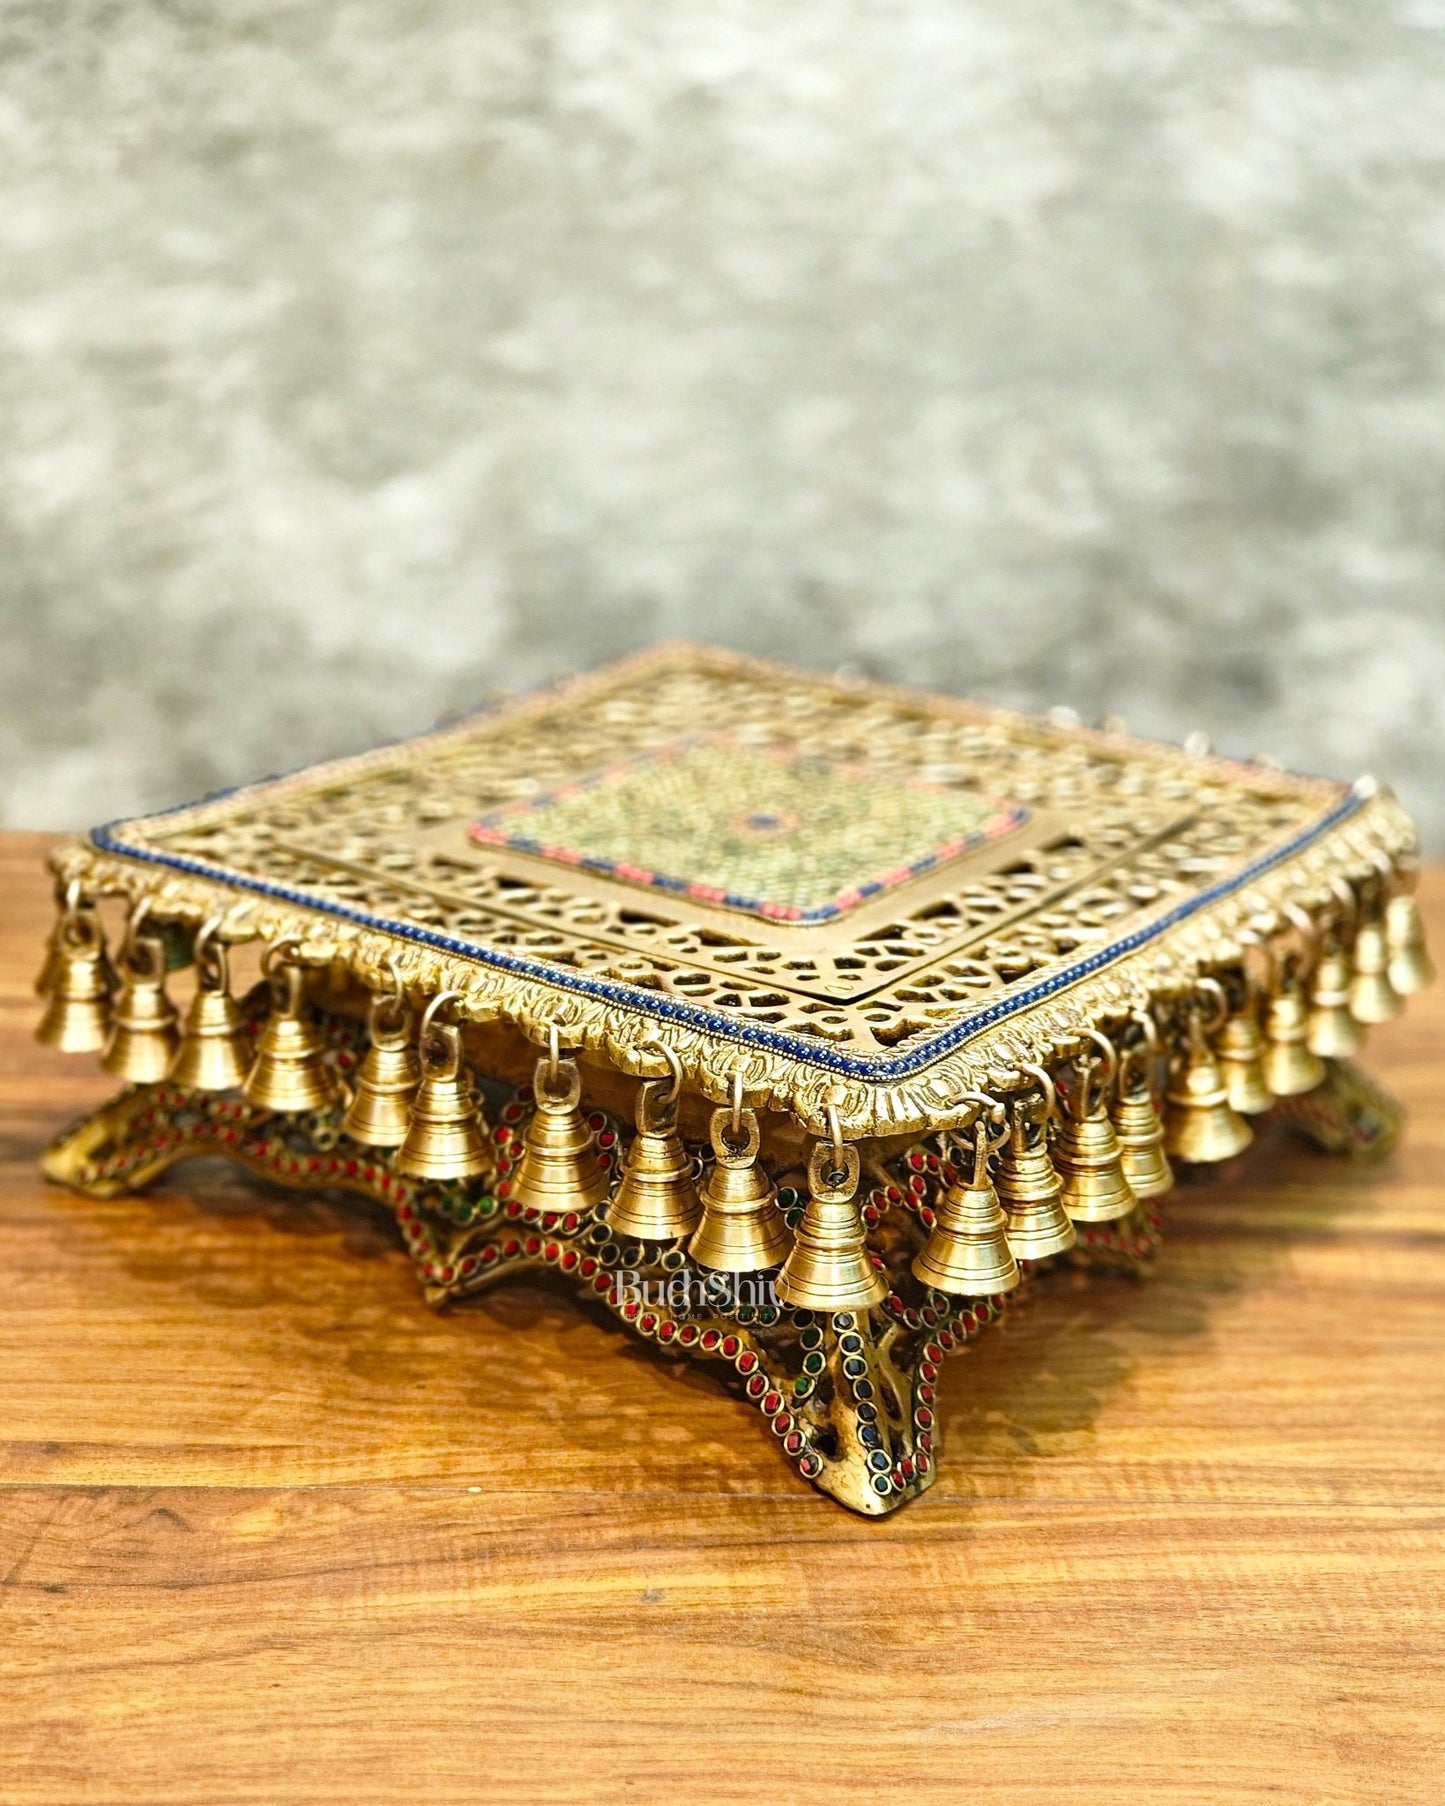 Handcrafted Pure Brass Pooja Chowki/Stand/Stool for Idols large - Budhshiv.com